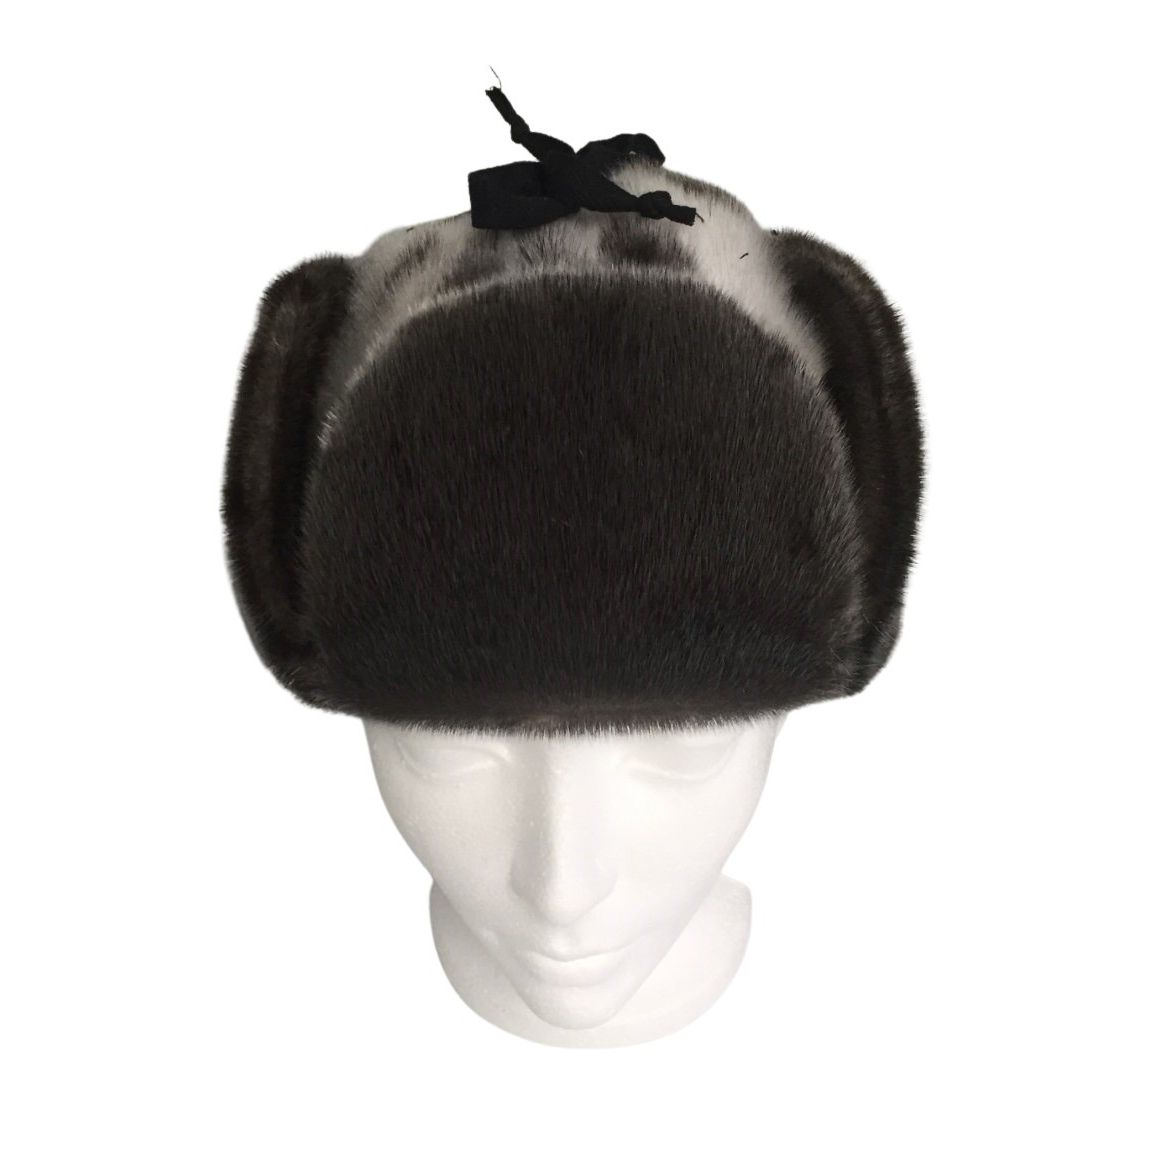 1-GNP_Police-Hat_Seal-Skin_Quilted-Cotton-Lined_Ear-Flaps